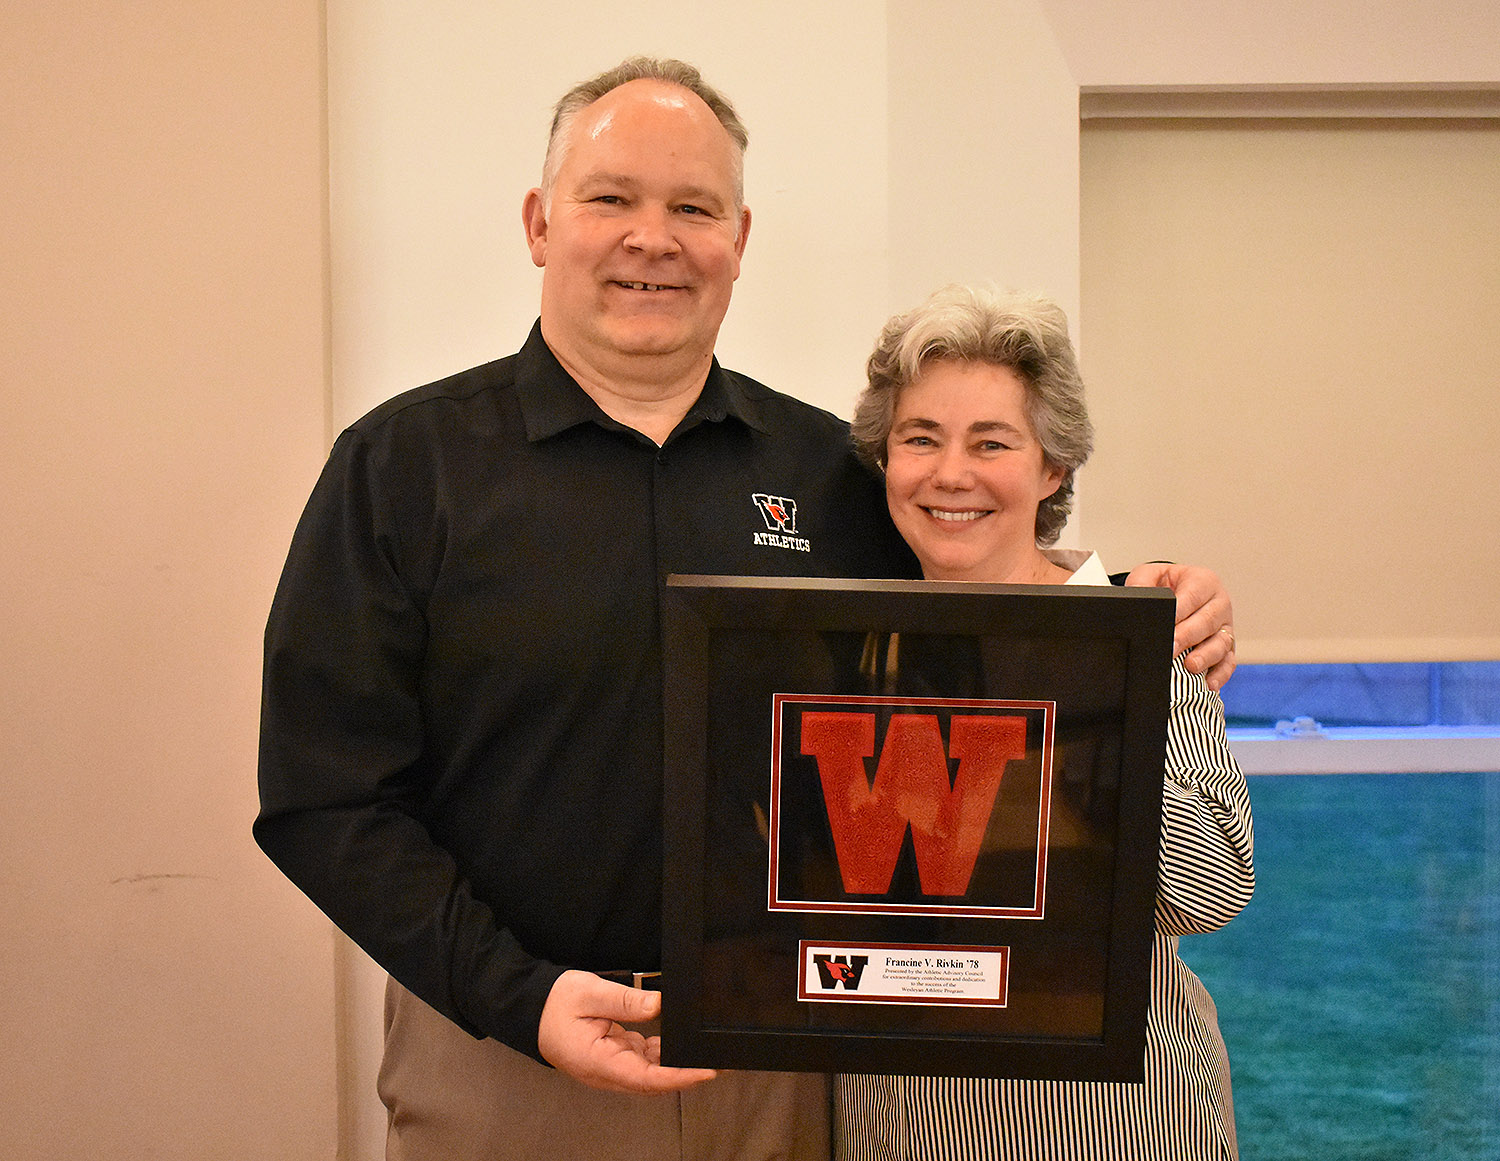 Francine Rivkin '78 was honored with the Cardinal Award, the Athletic Advisory Council's recognition of extraordinary contributions and dedication to the success of the Wesleyan Athlete Program. Rivkin is pictured with Mike Whalen, the Frank V. Sica Director of Athletics and chair of Physical Education, at left.